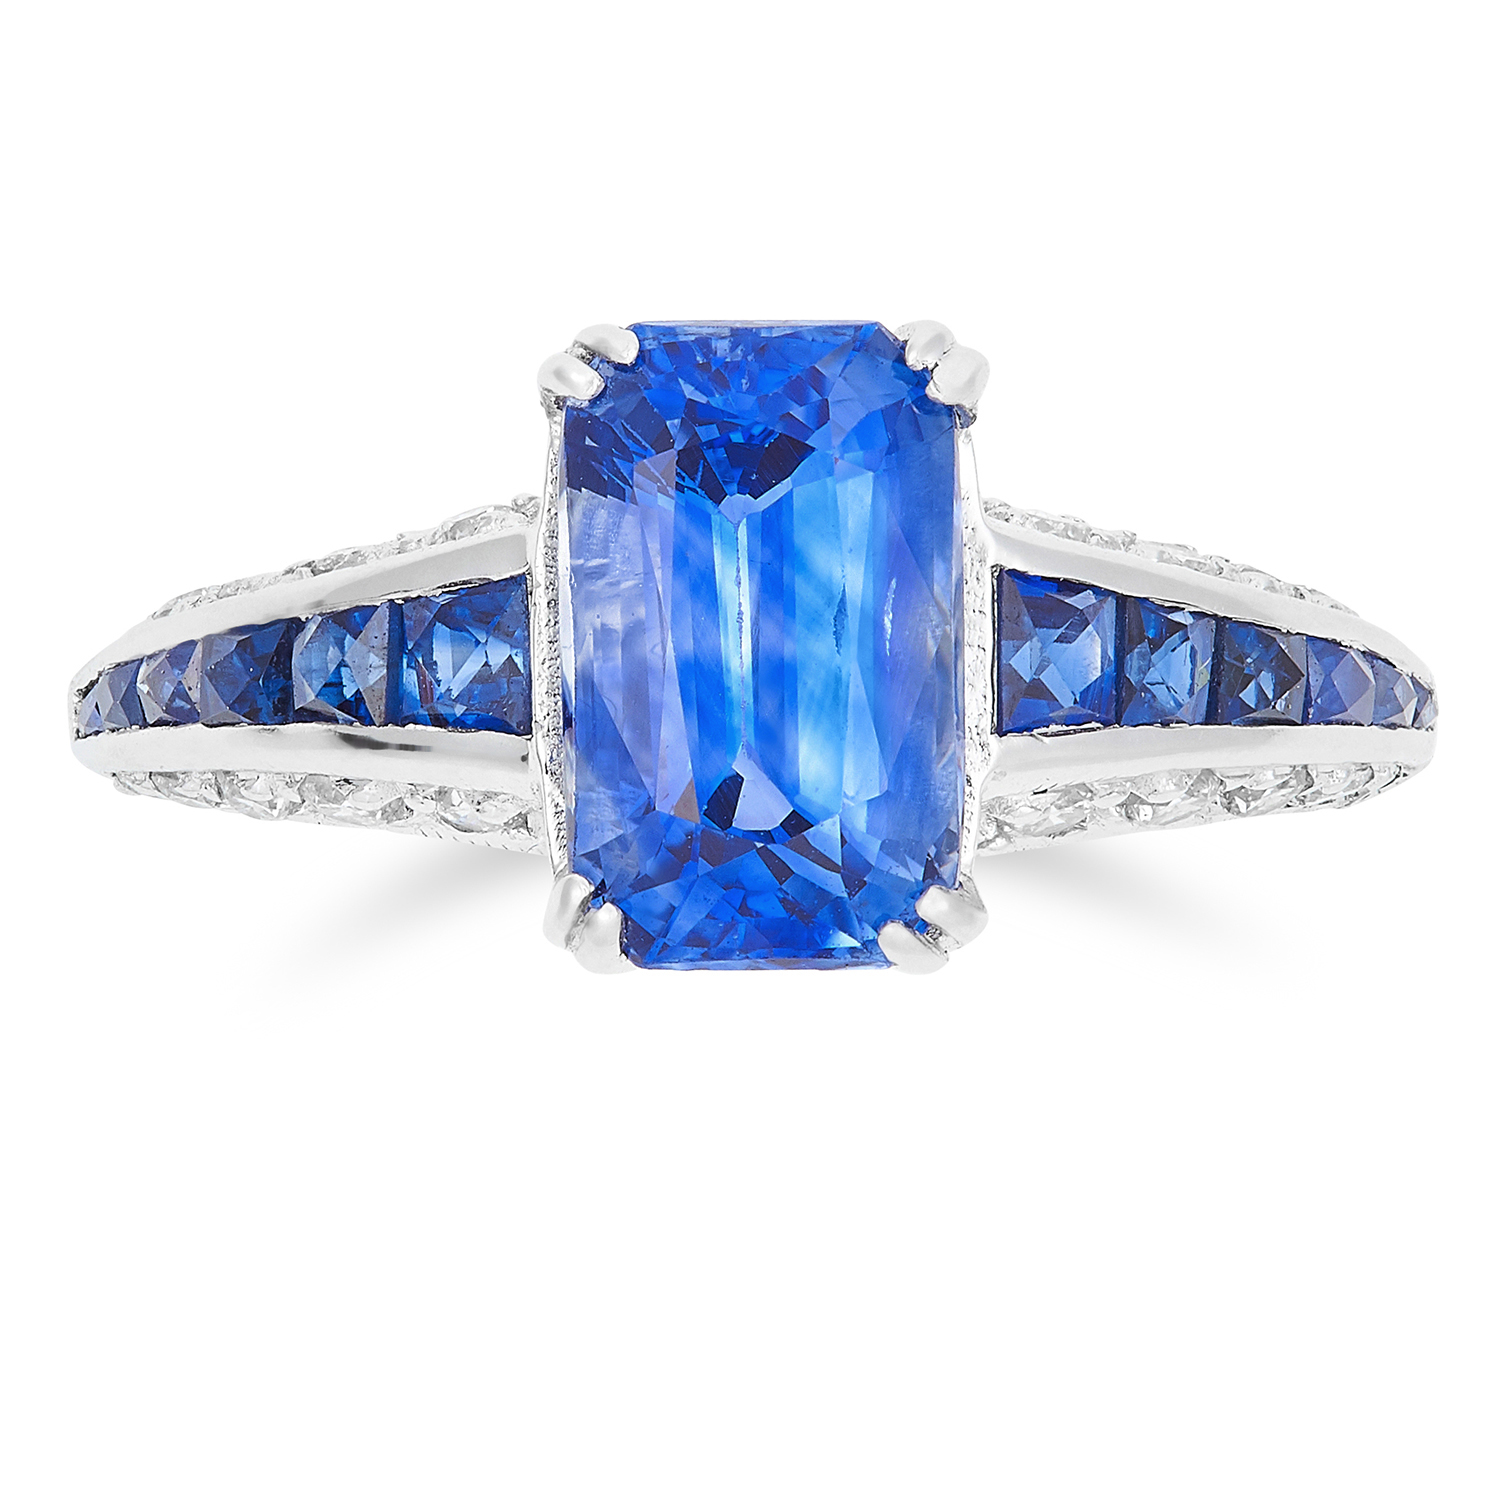 UNHEATED 2.54 CARAT SAPPHIRE AND DIAMOND RING set with a rectangular modified brilliant cut sapphire